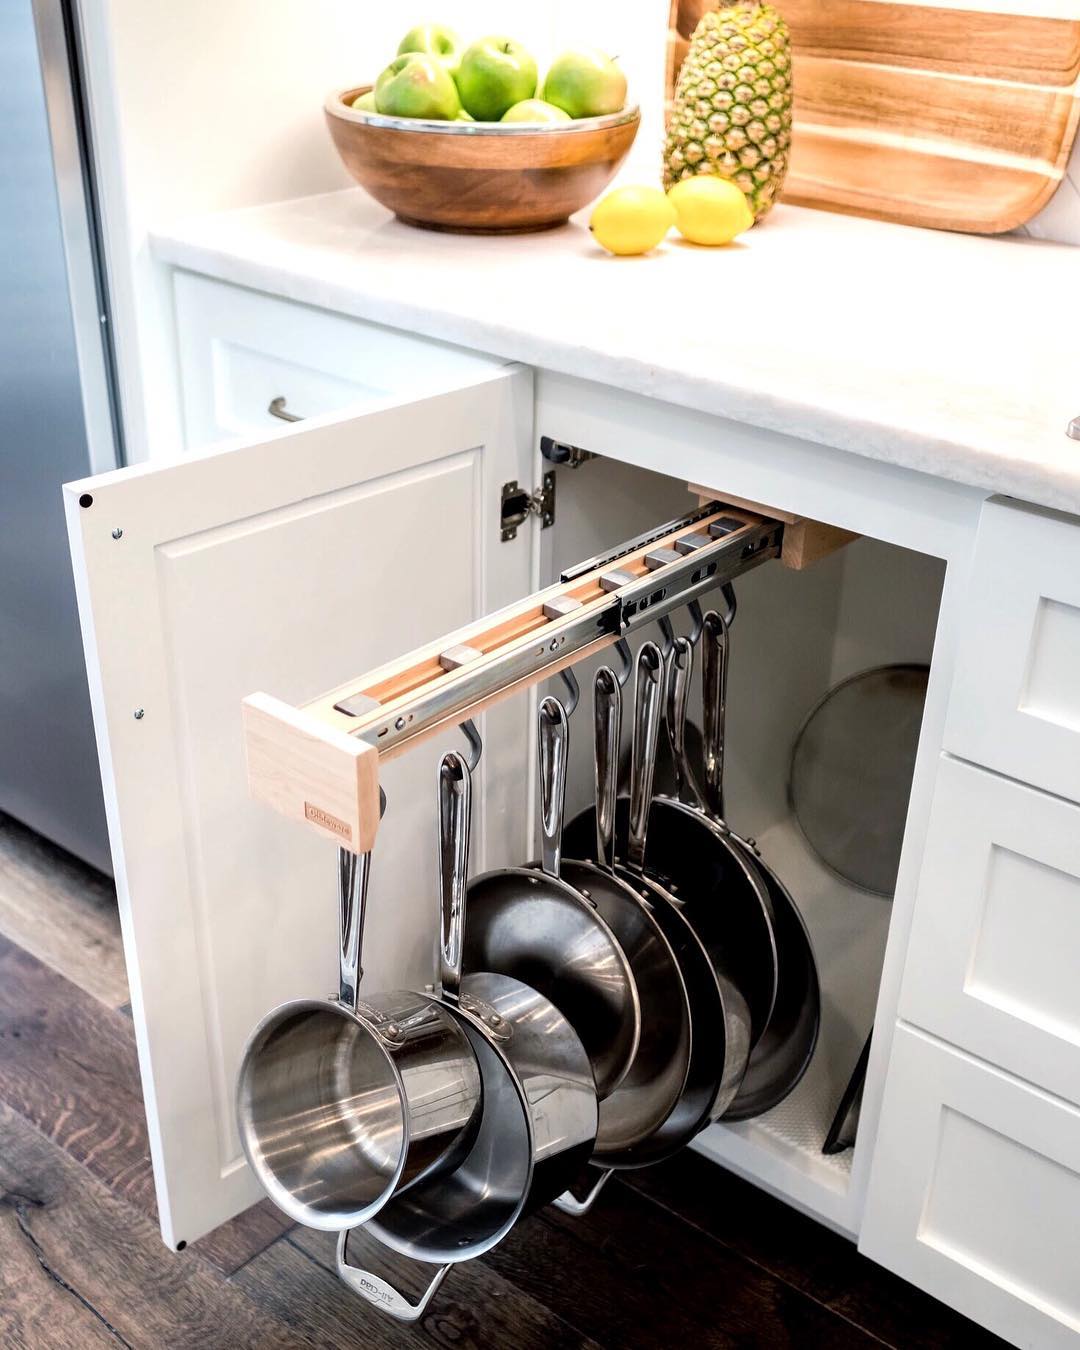 Slide-out pots and pans organizer in cabinet. Photo by Instagram user @designdirectionsokc